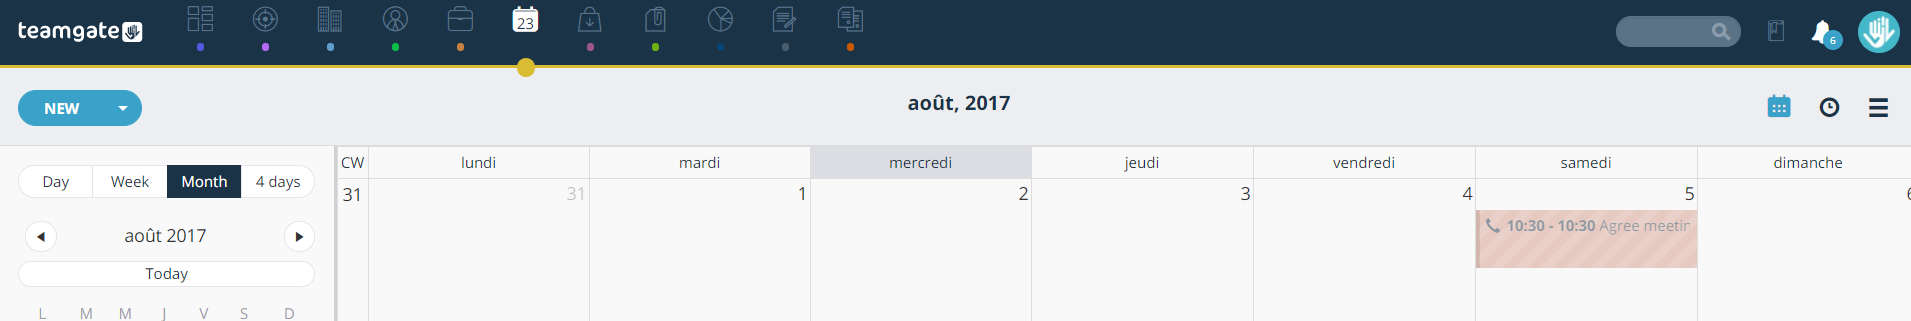 locale-settings-language-first-day-of-the-week-calendar-teamgate.png